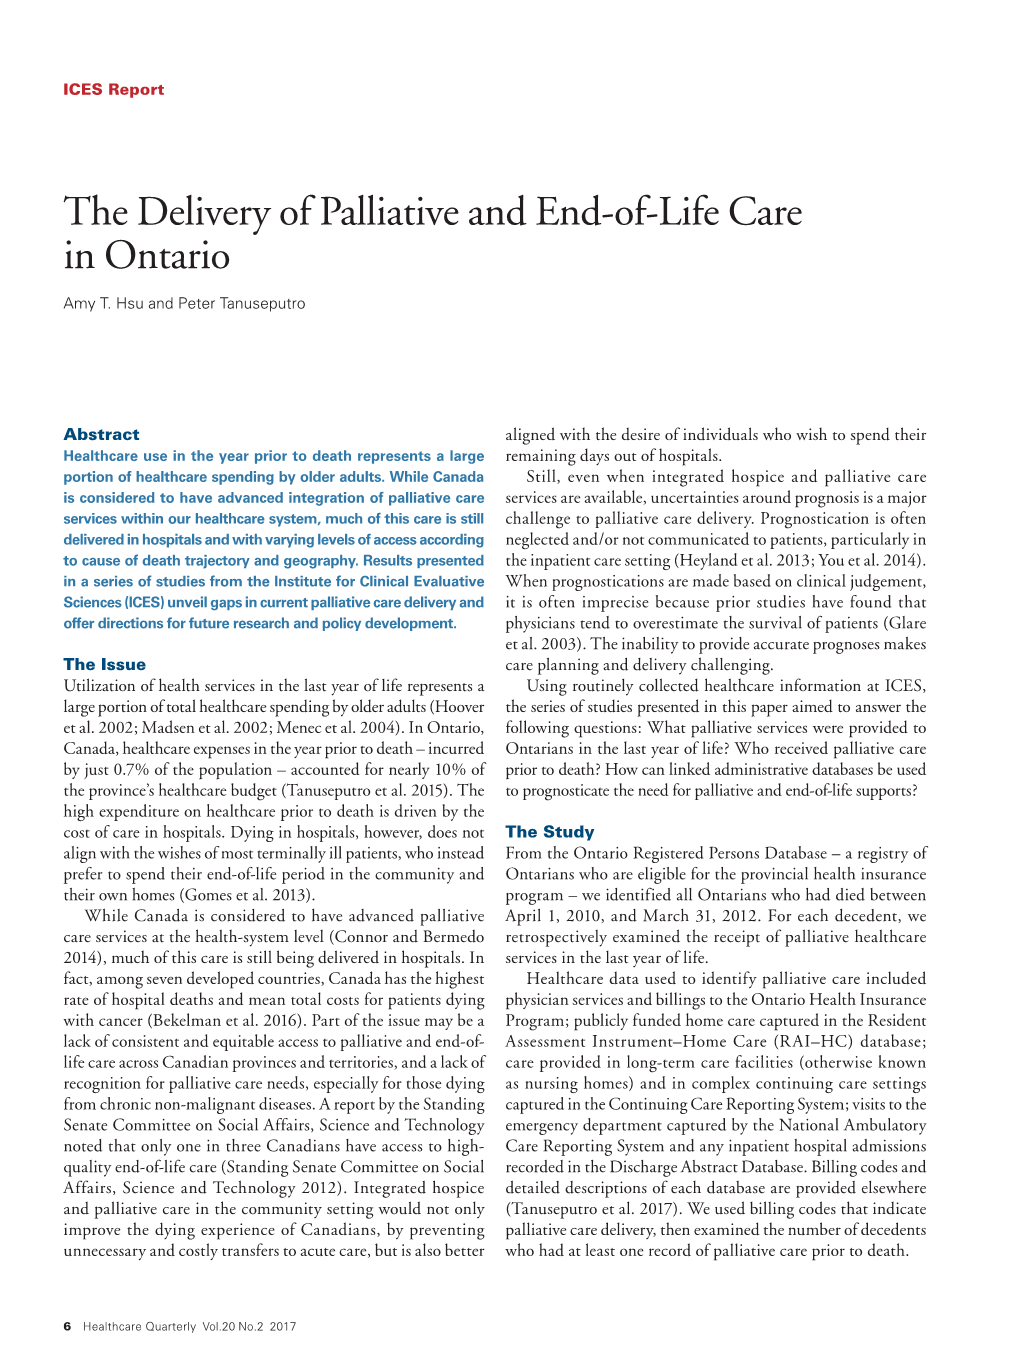 The Delivery of Palliative and End-Of-Life Care in Ontario